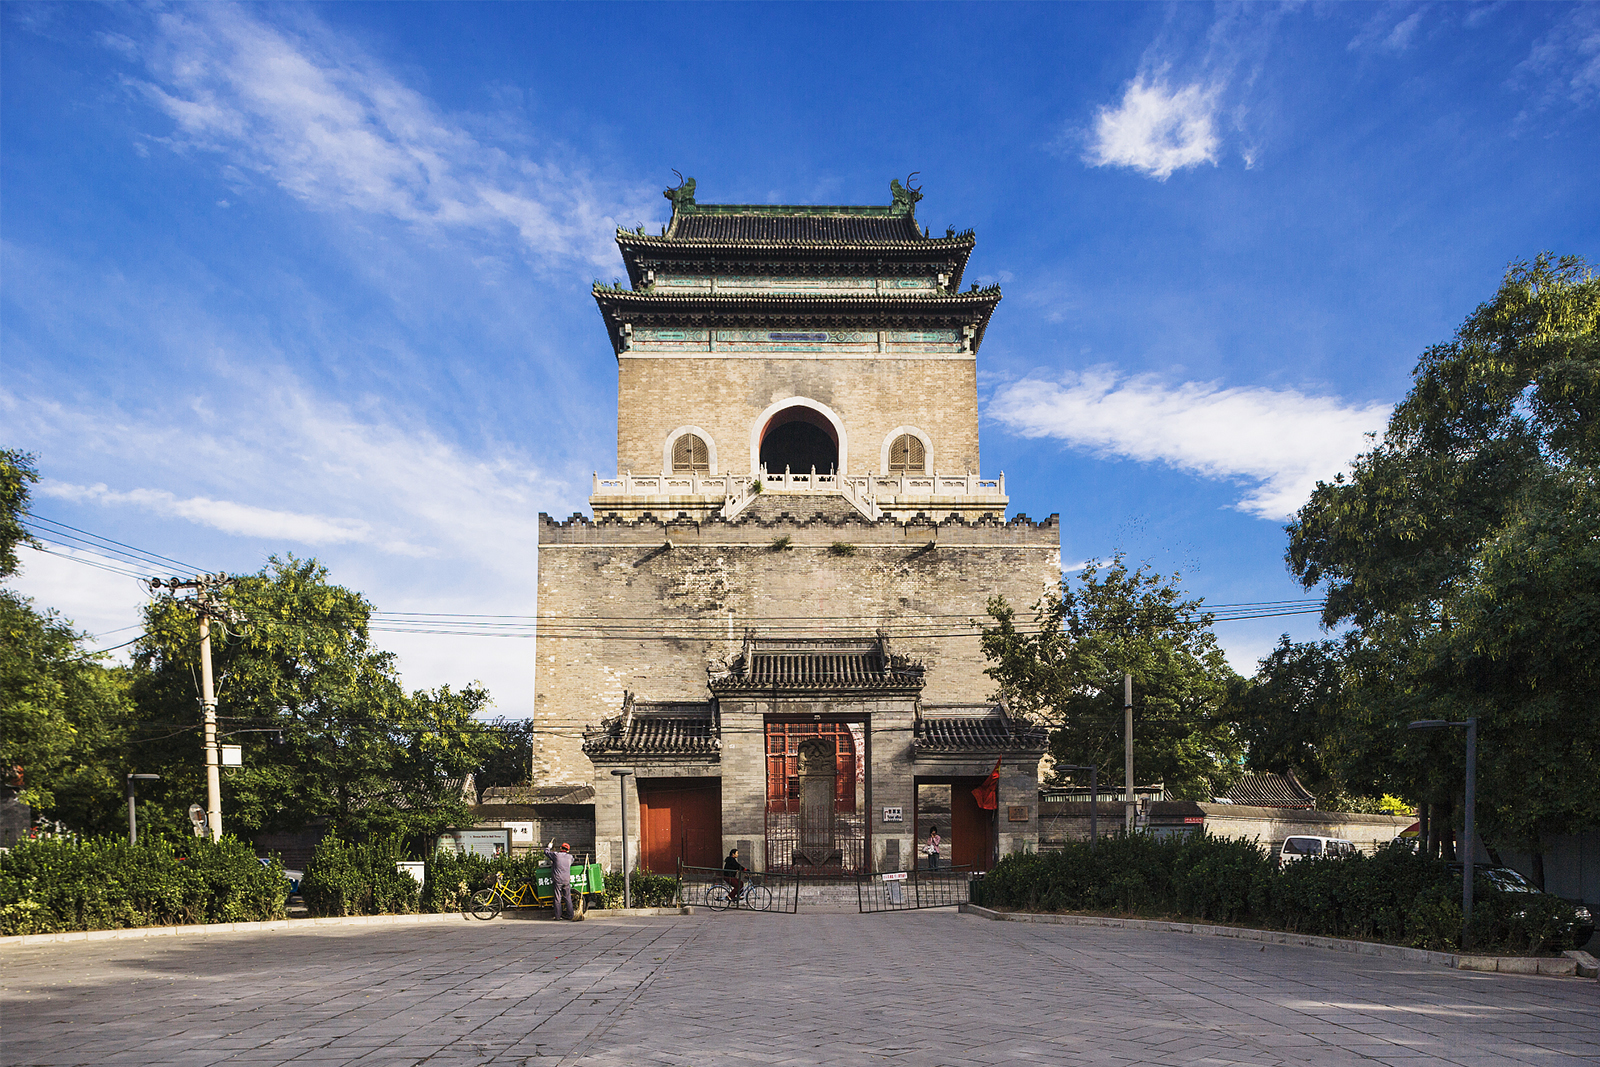 A file photos shows the Bell Tower at the northern end of the Beijing Central Axis. /CFP